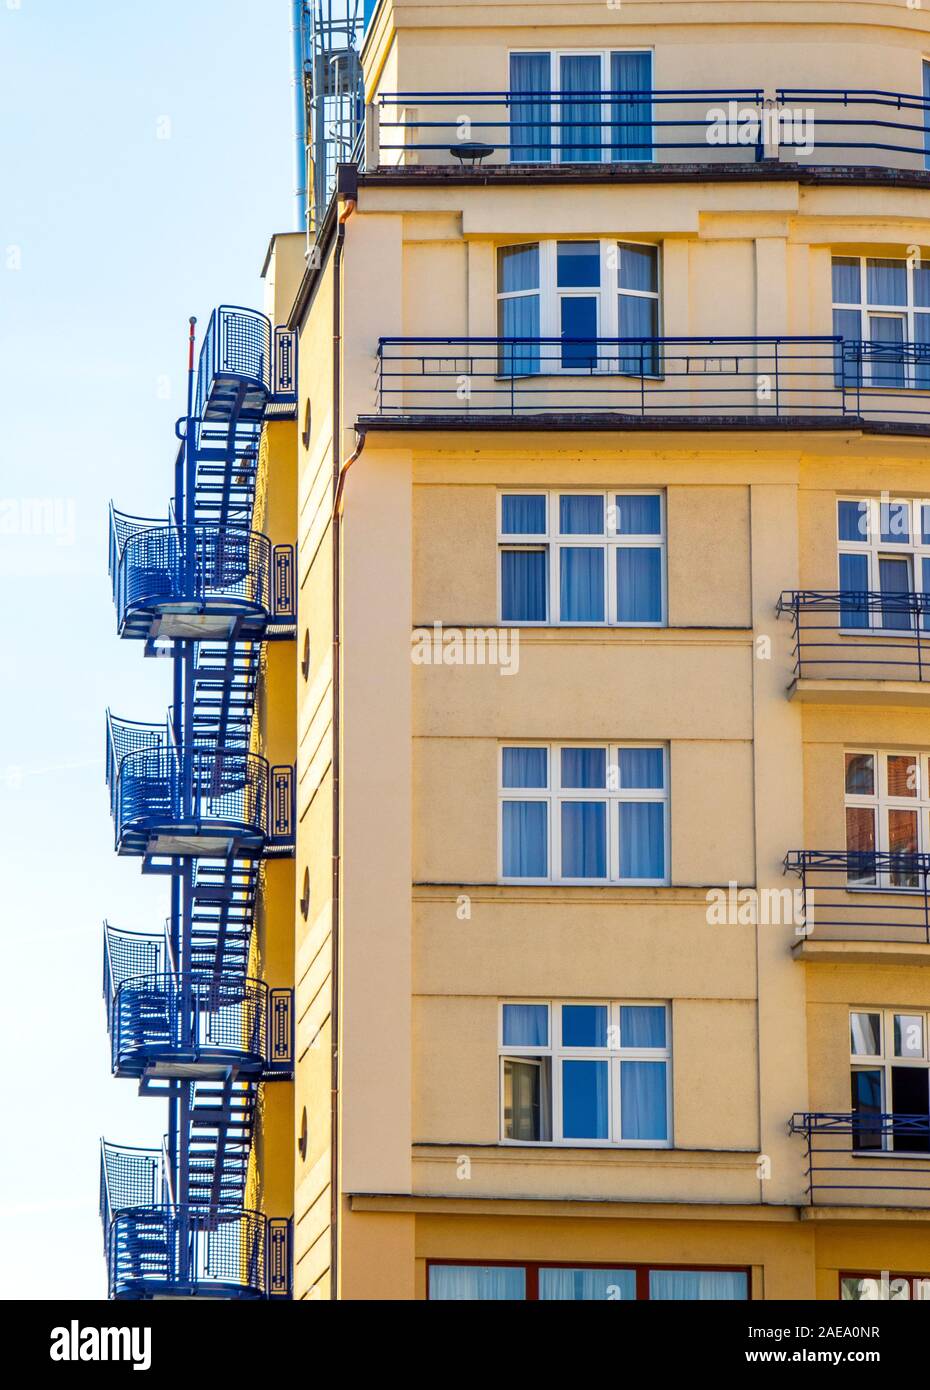 Fire escape stairwell on the side of a building in Prague Czech Republic. Stock Photo